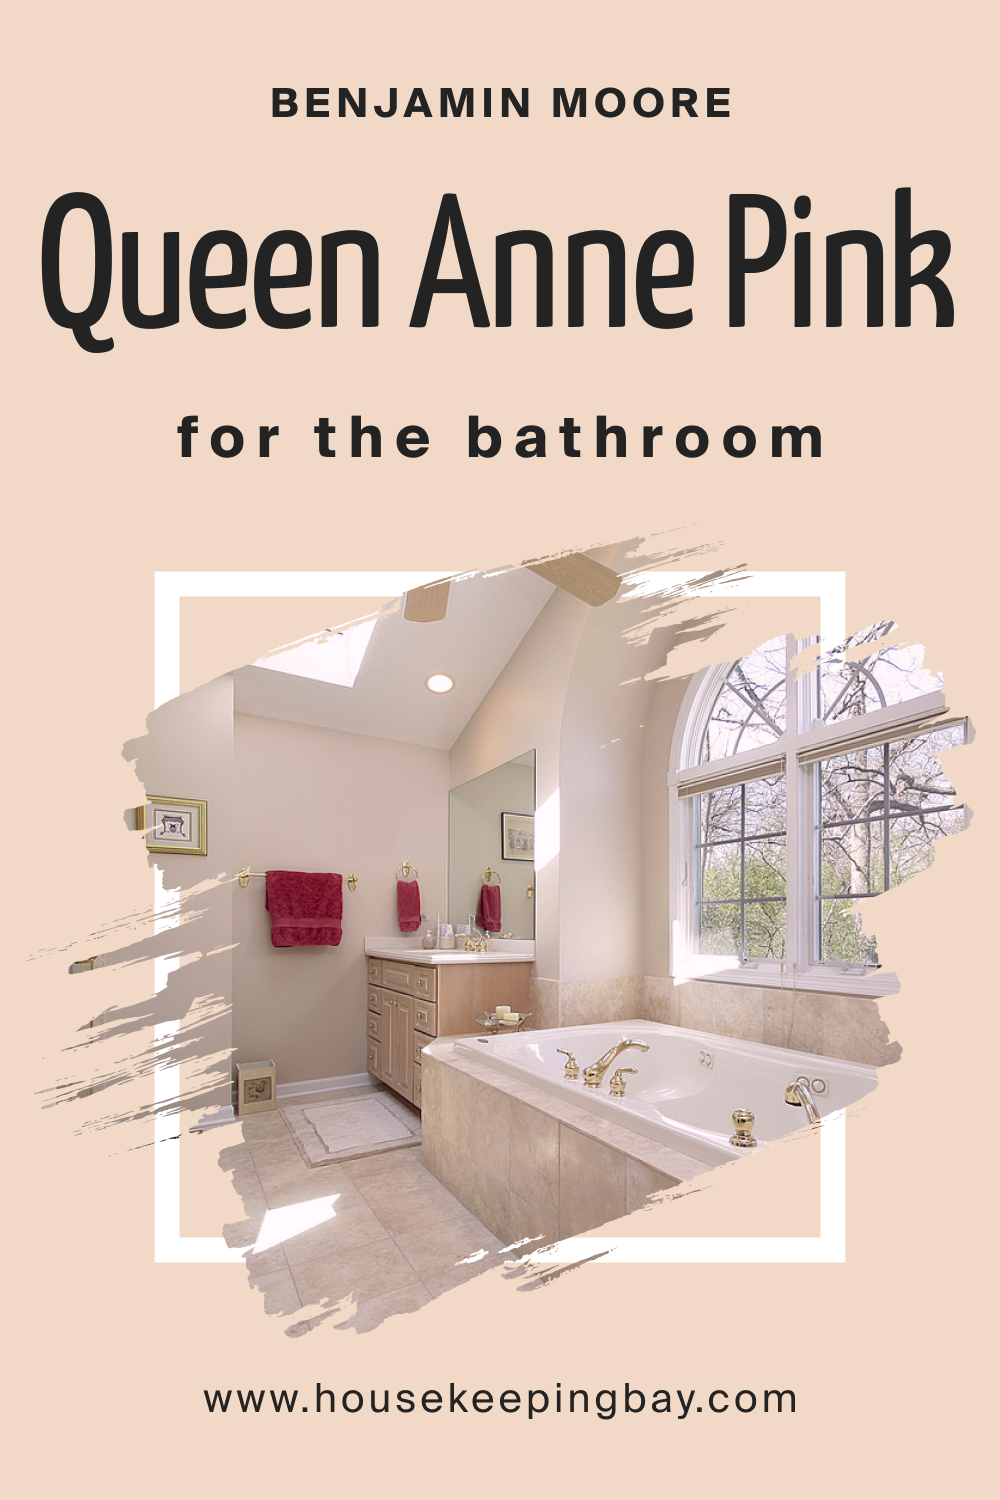 How to Use Queen Anne Pink HC-60 in the Bathroom?